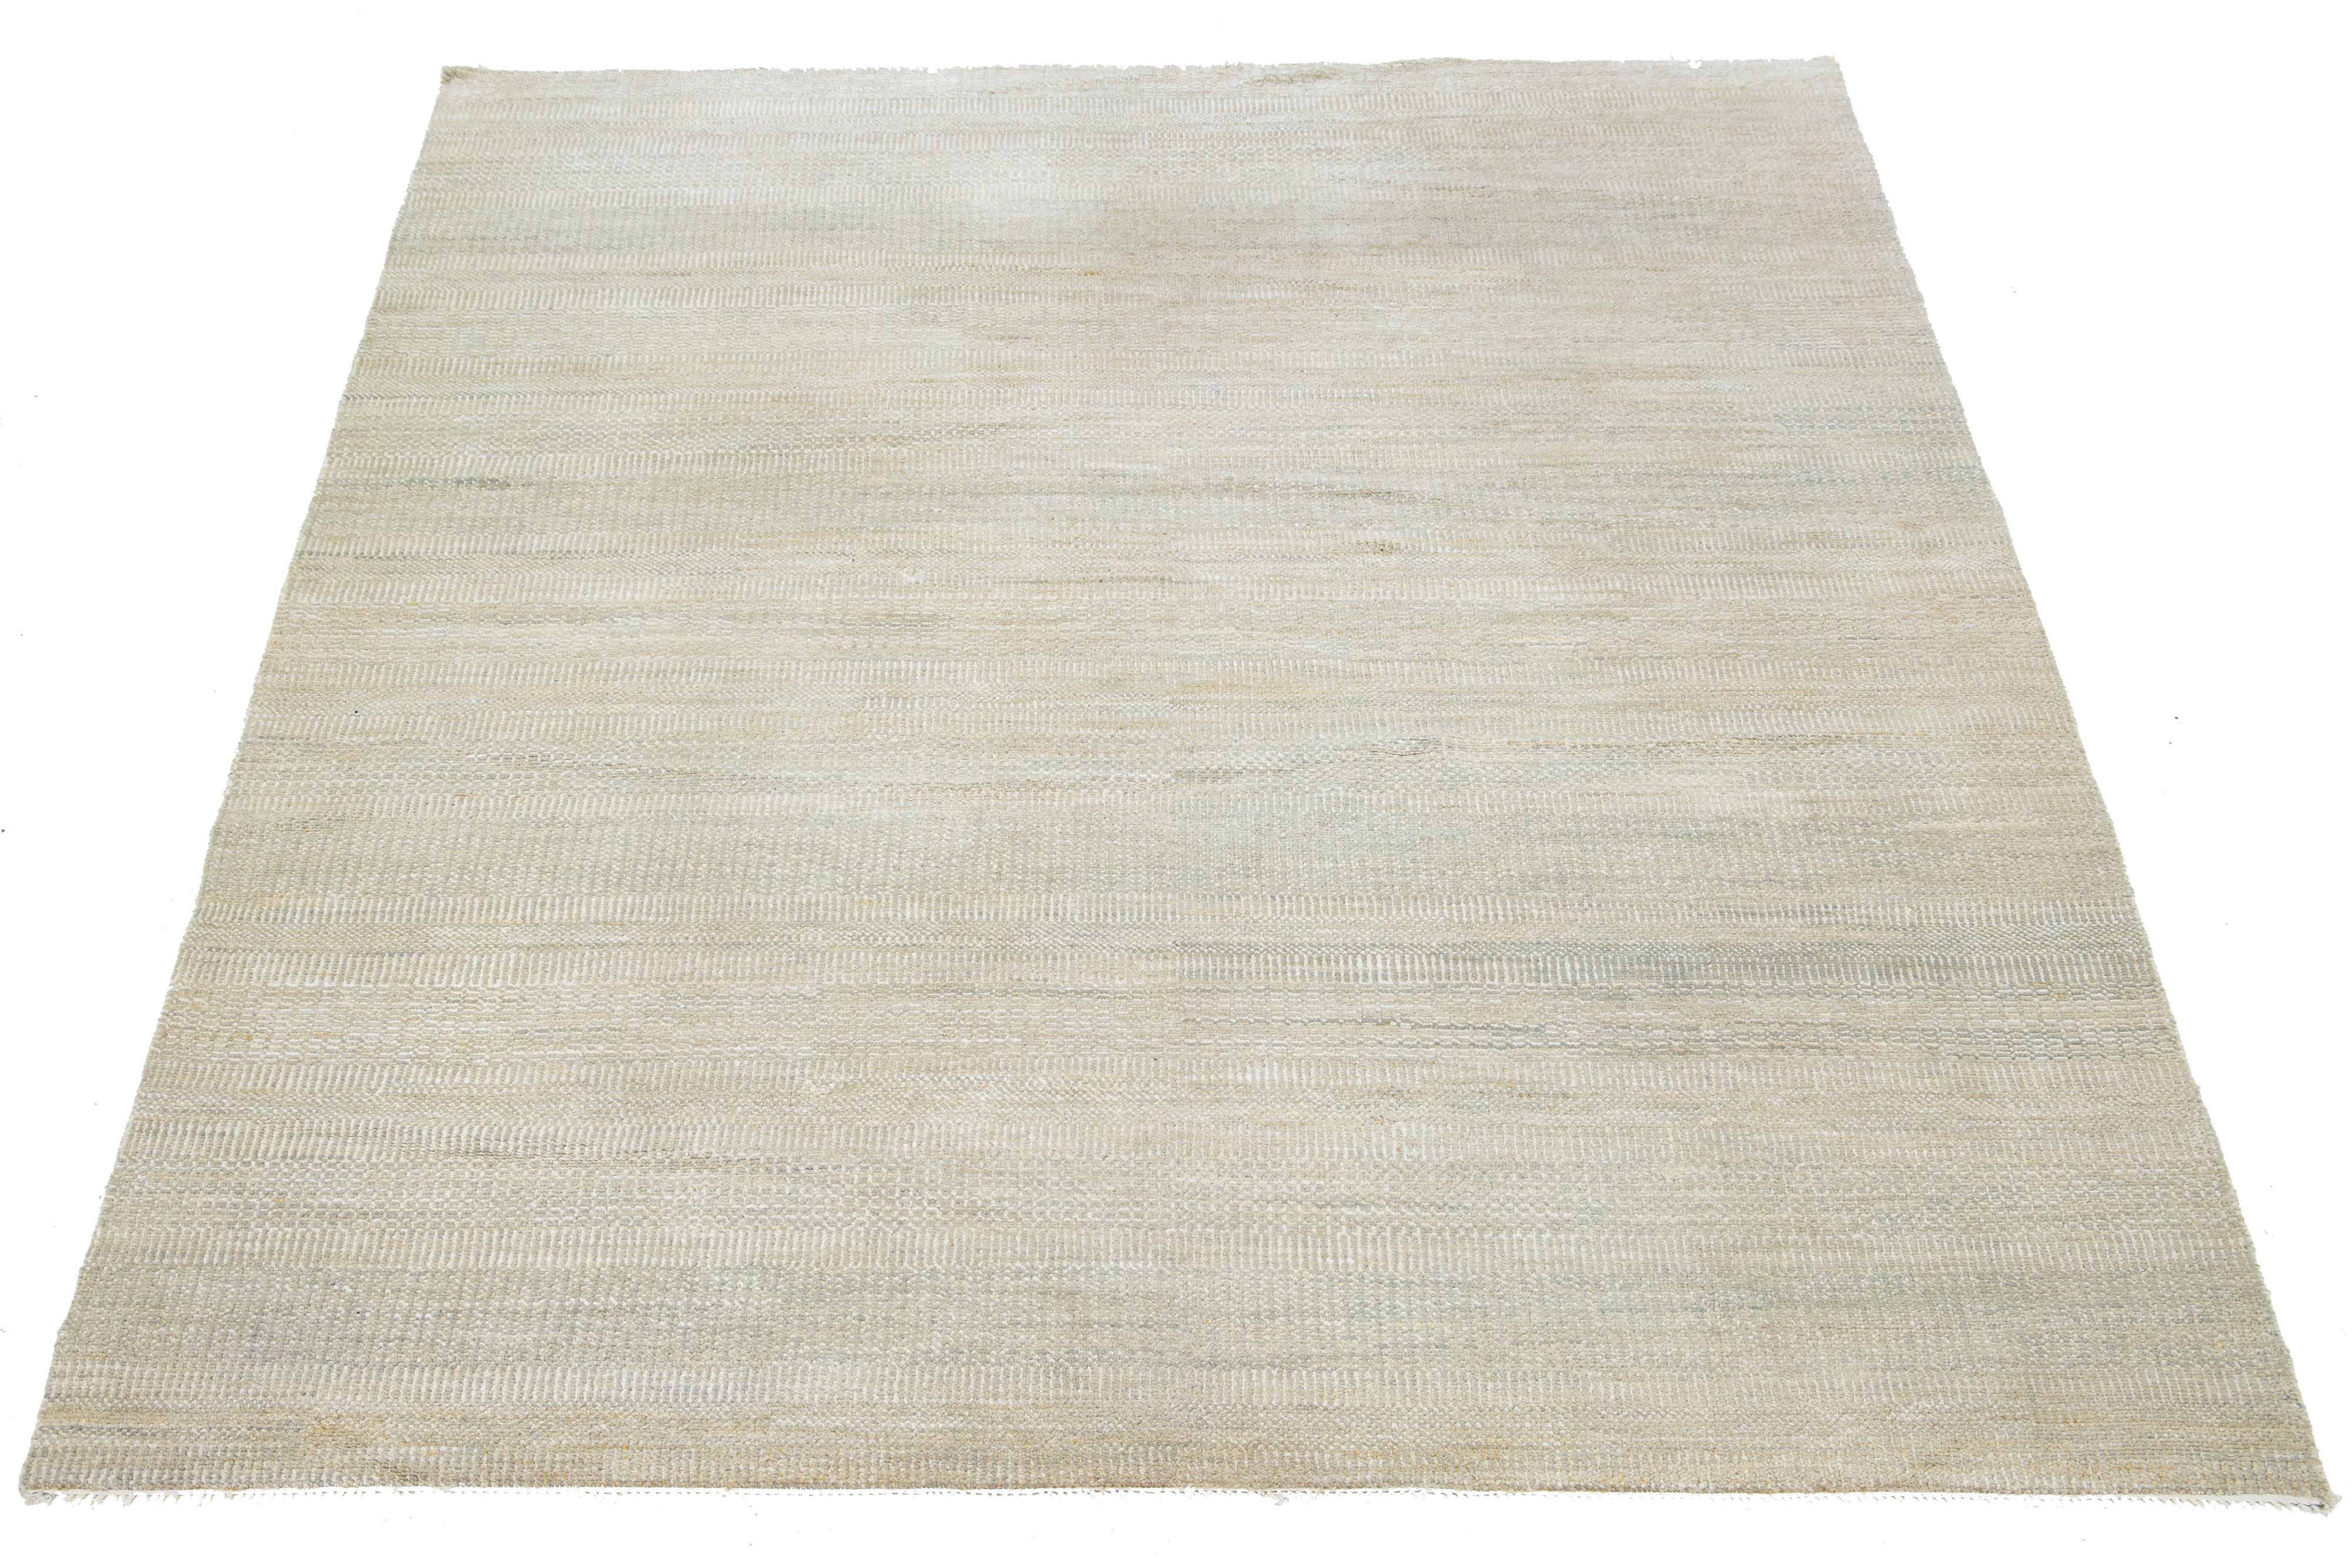 This stunning hand-knotted wool rug features a beige field and minimalist pattern with gray and golden accents, offering a transitional allure.

This rug measures 8' x 10'2